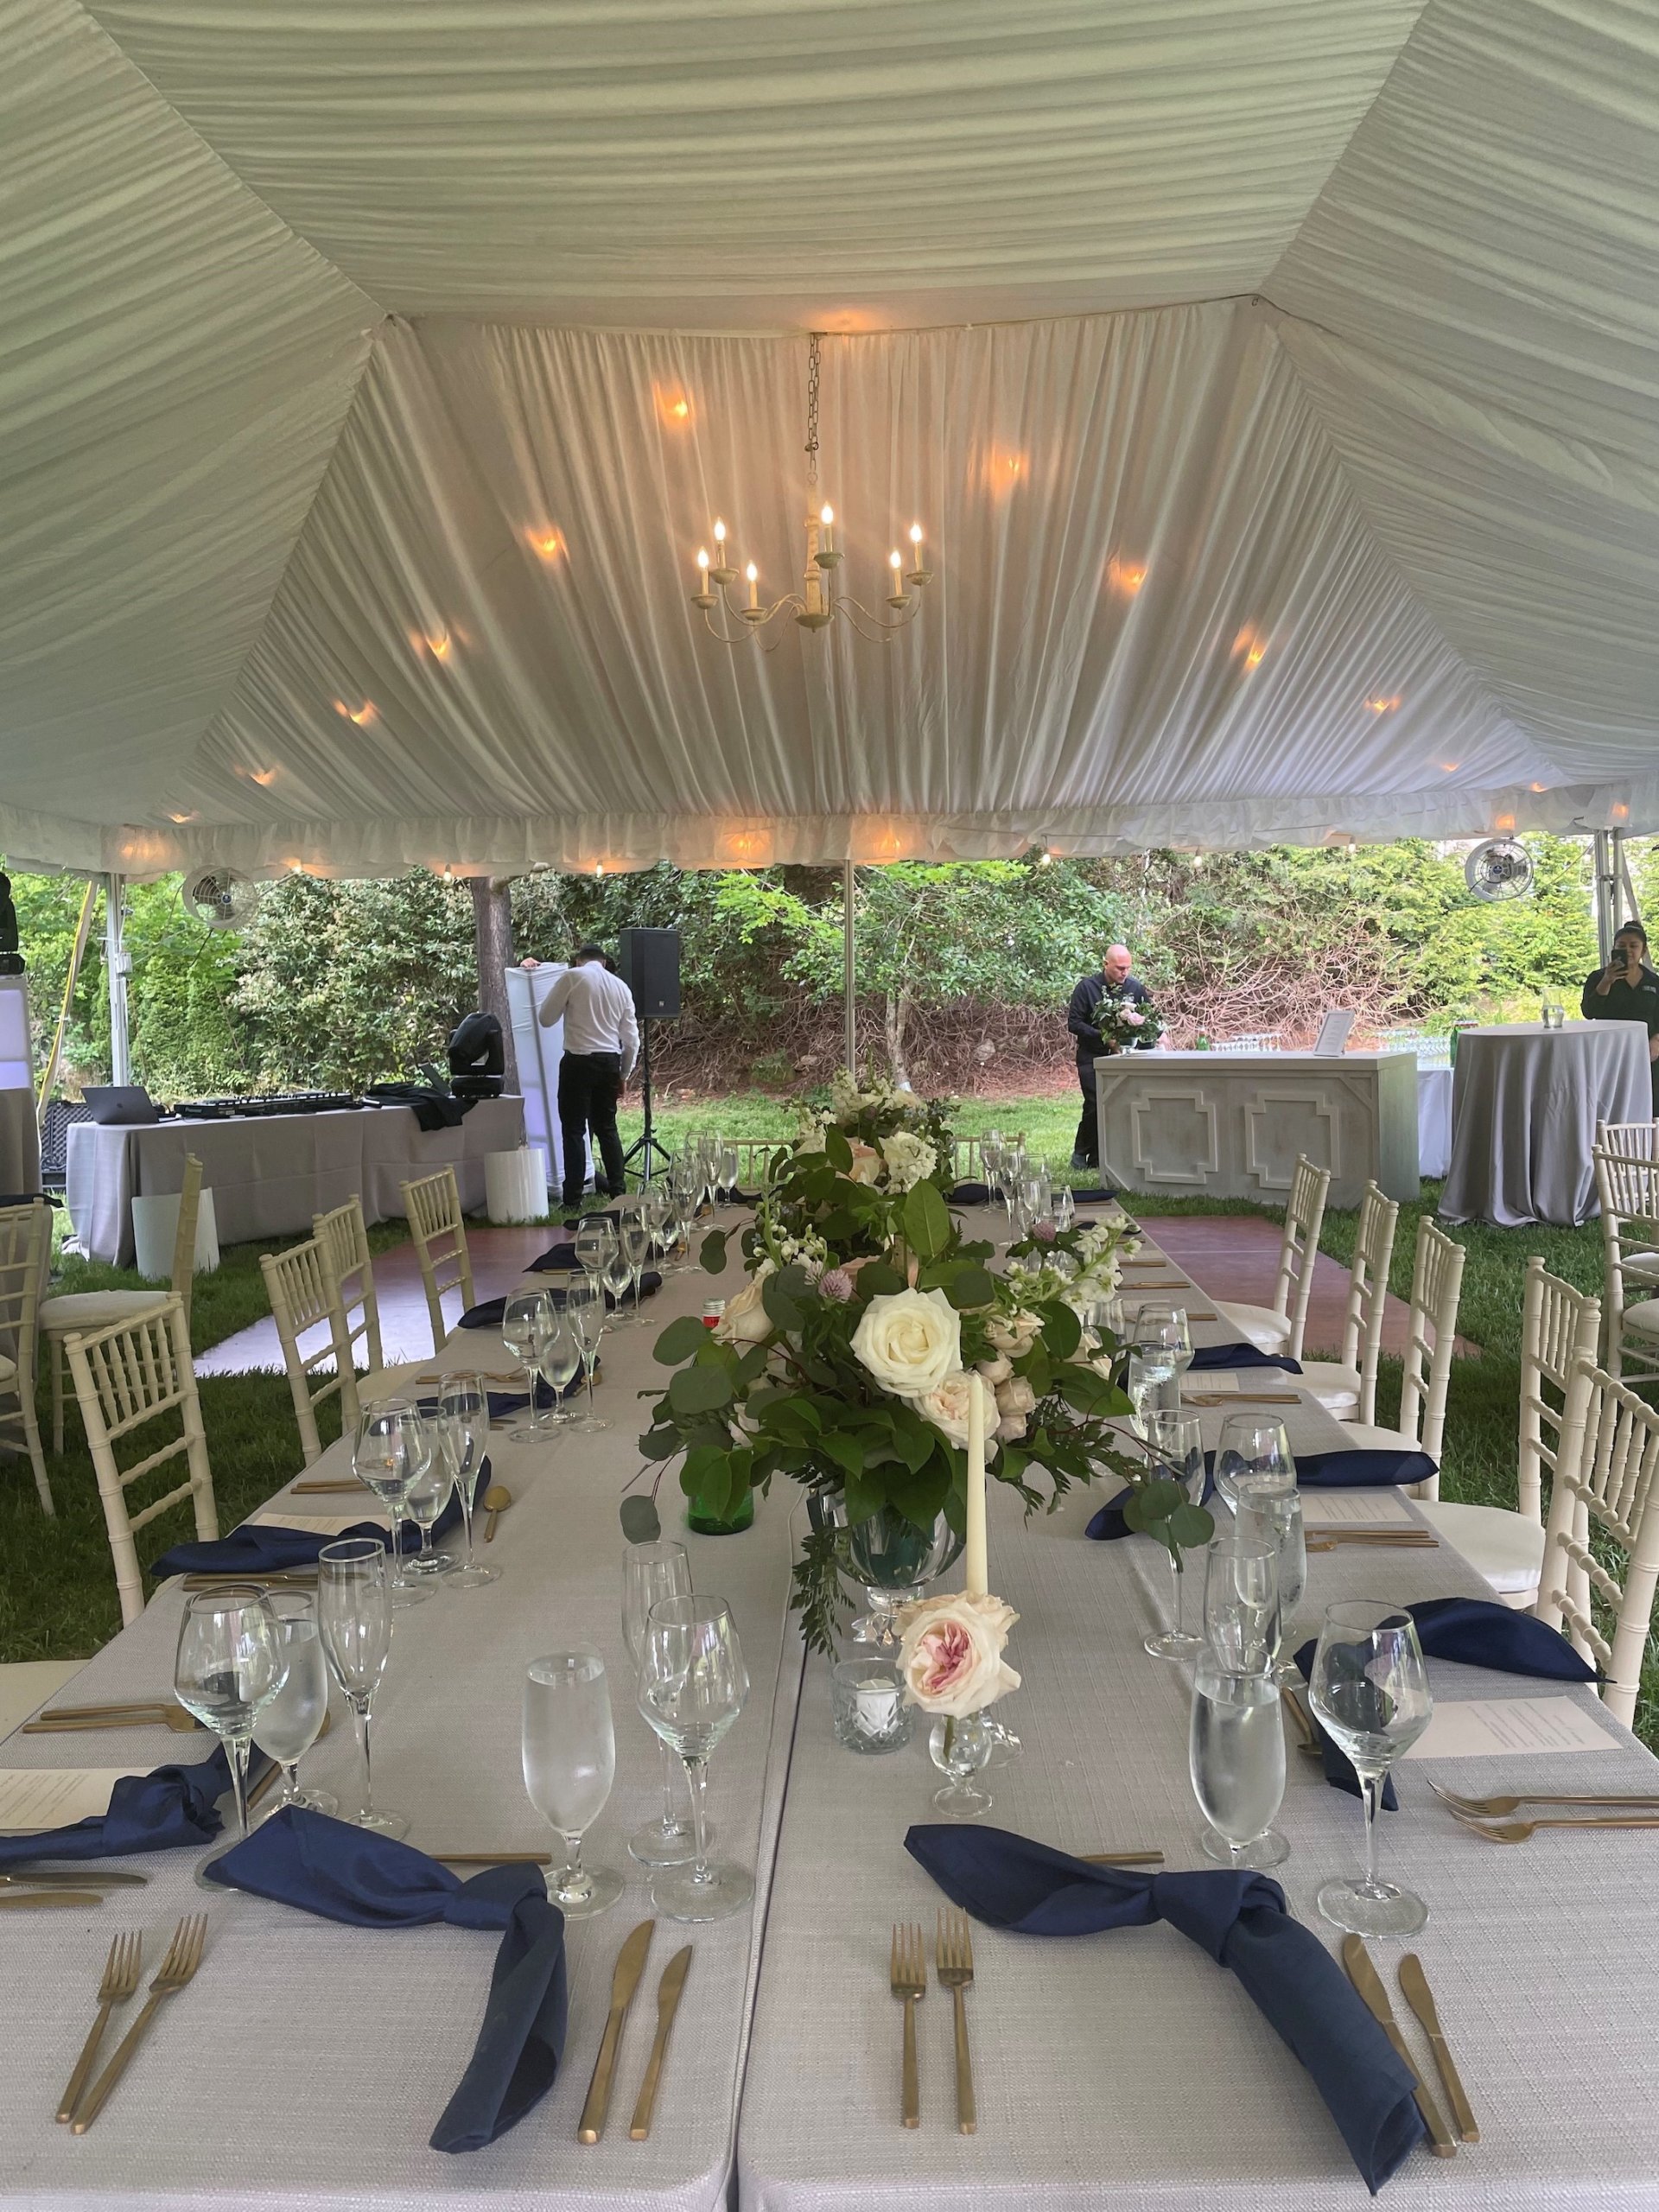 30X45FRAME W LINER AND CHANDELIERS scaled - Frame Tents